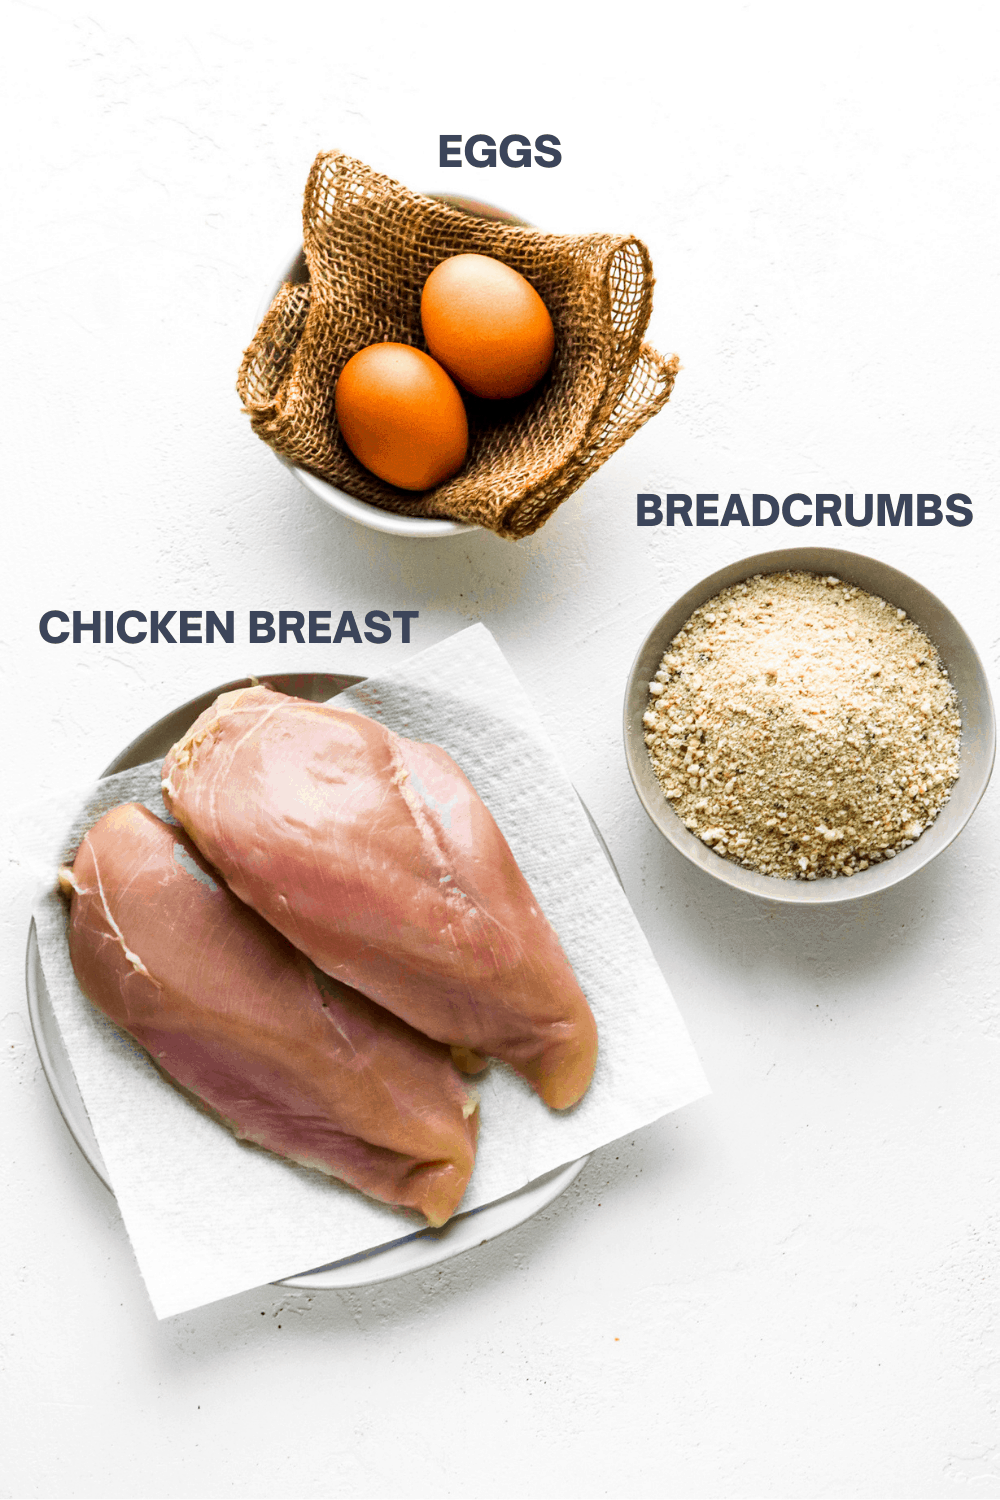 raw chicken breast, breadcrumbs and eggs on a white surface